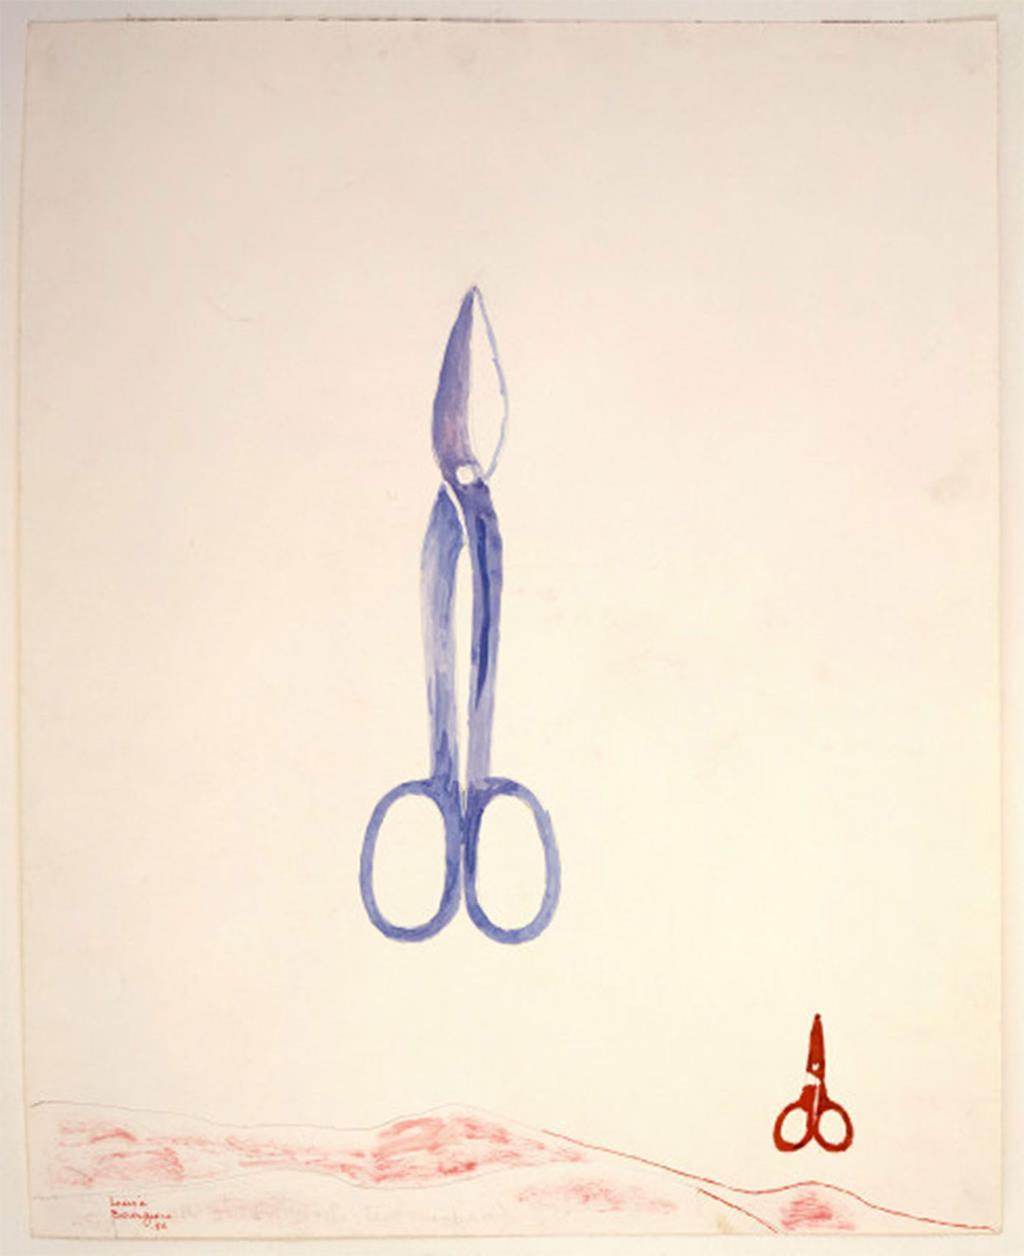 Spit or Star 1986 Watercolor and pencil on paper 60.3 x 48.3 cm / 23 3/4 x 19 in Photo: Christopher Burke